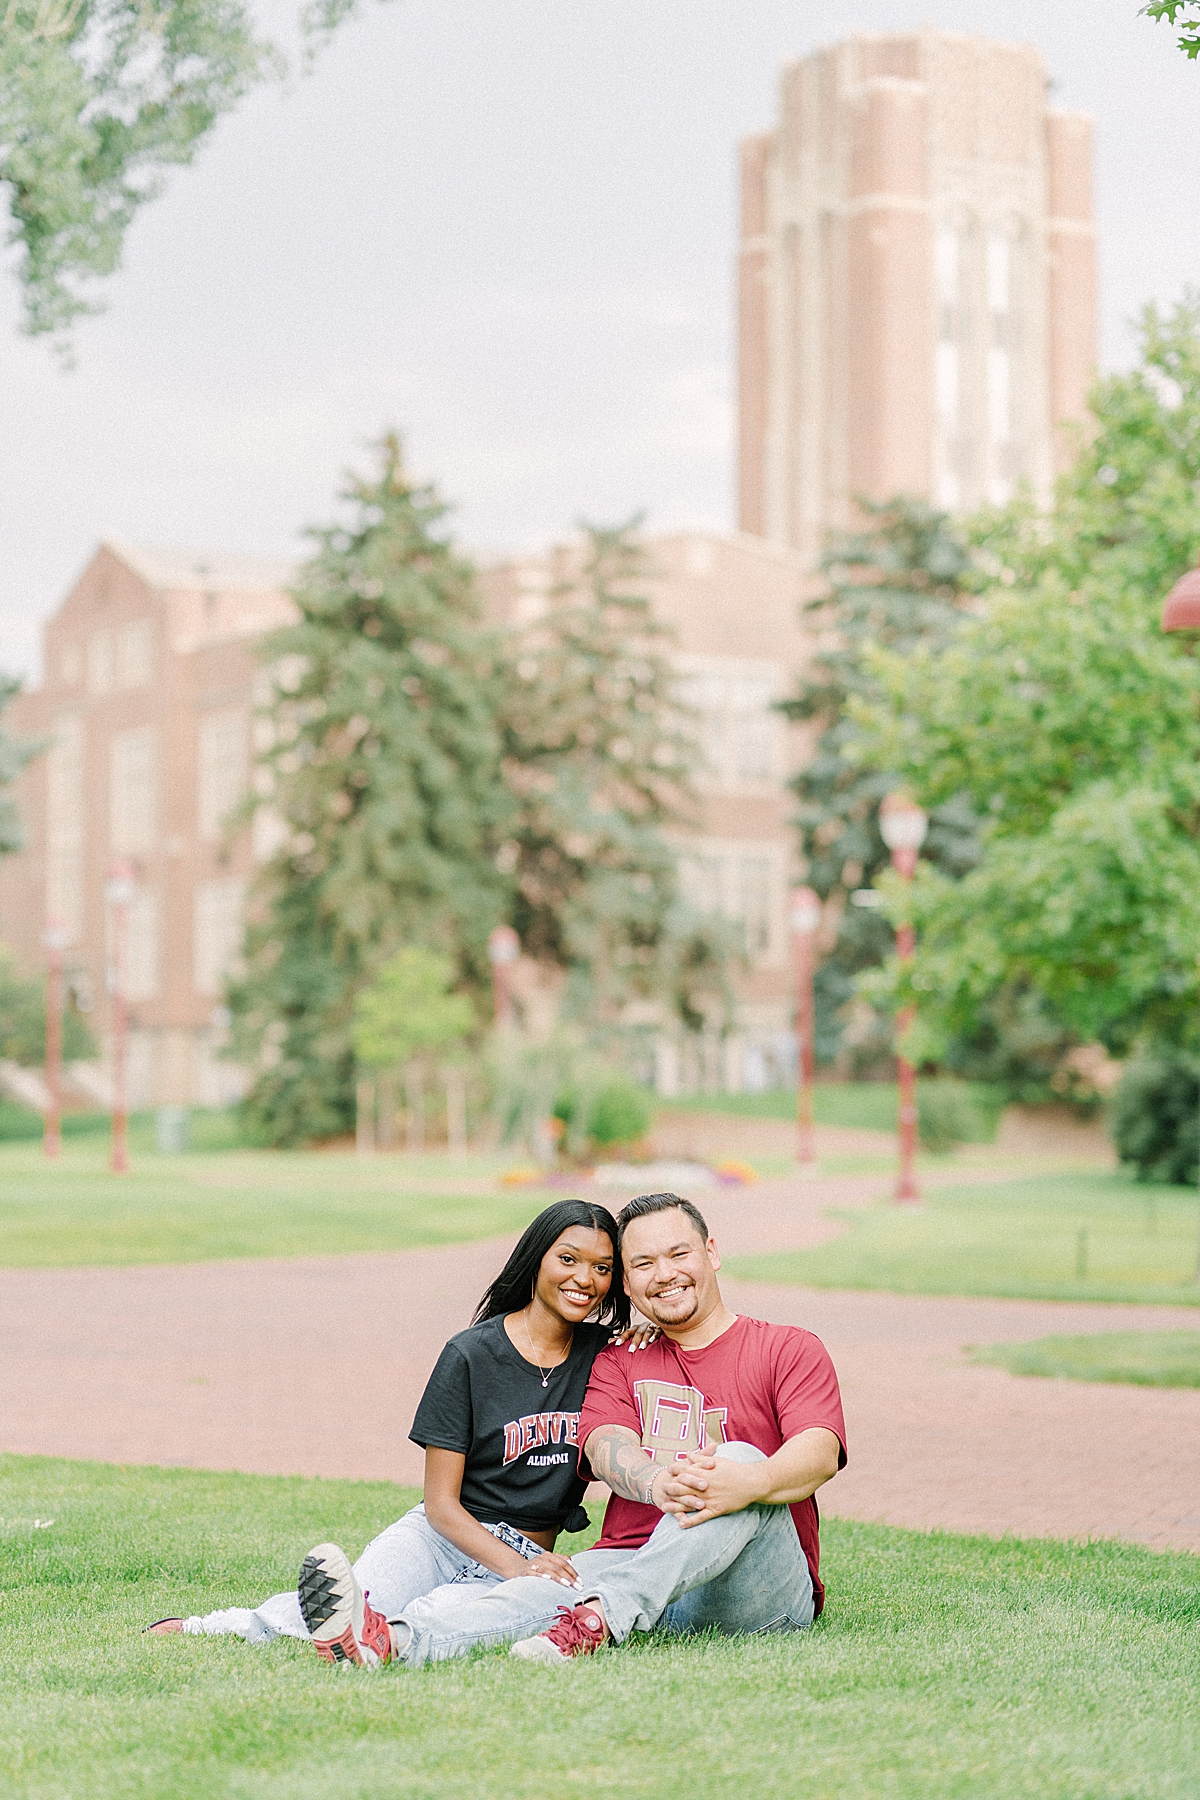 University of Denver students hang on out campus